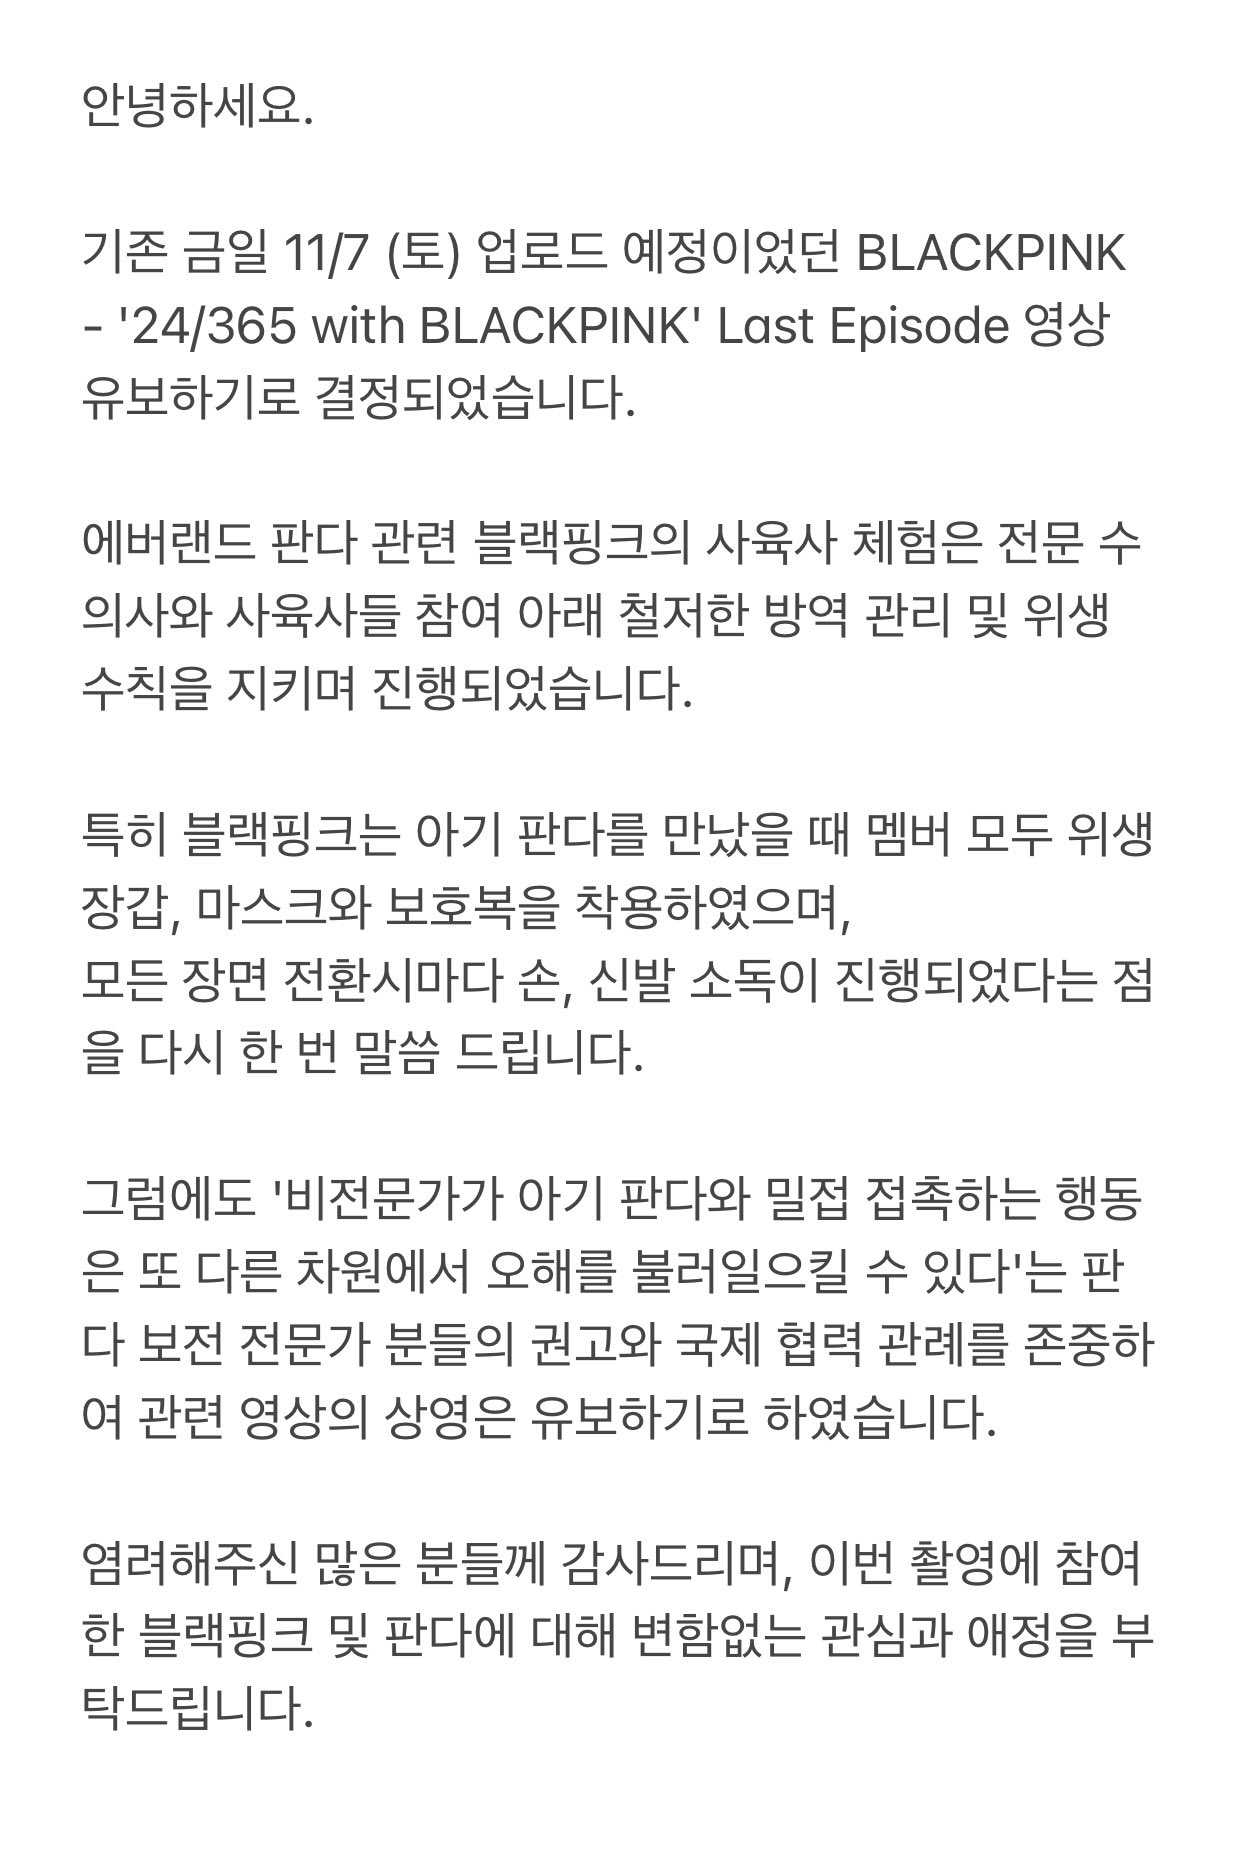 yg-entertainment-postpones-release-of-24-365-with-blackpink-last-episode-following-concerns-over-contact-with-panda-1